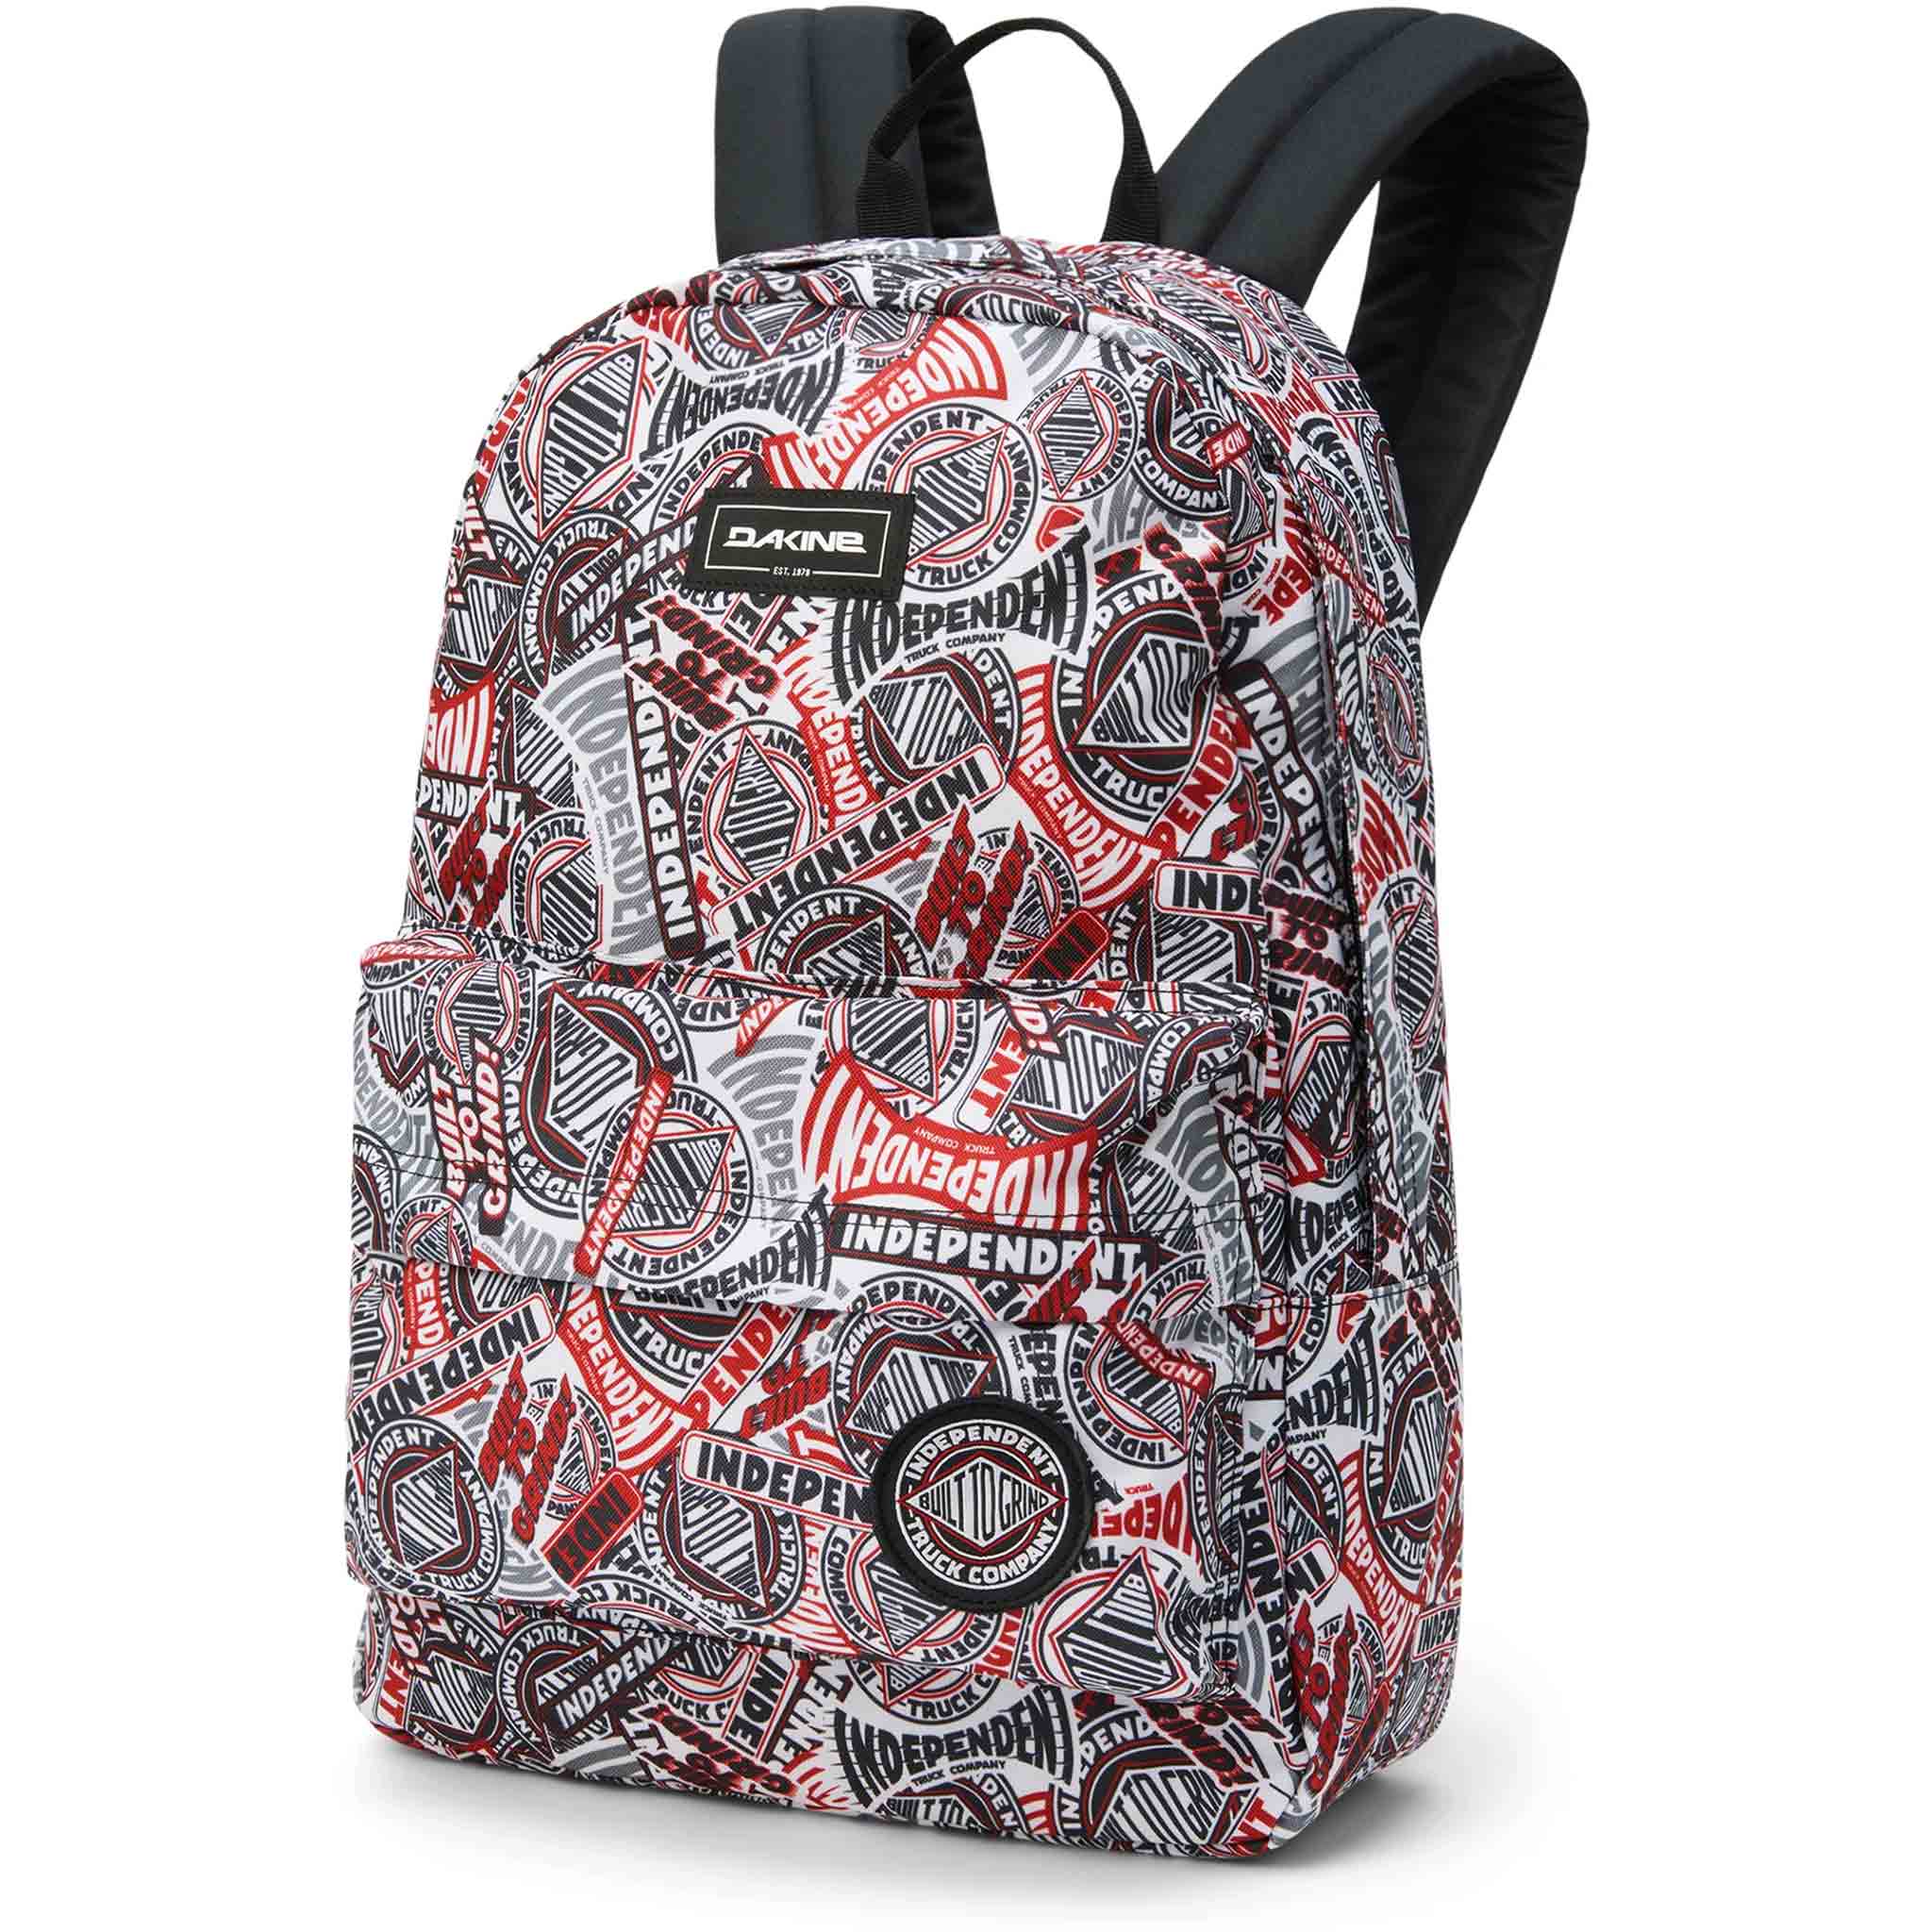 Dakine X Independent 365 Pack 21L All Over Backpack